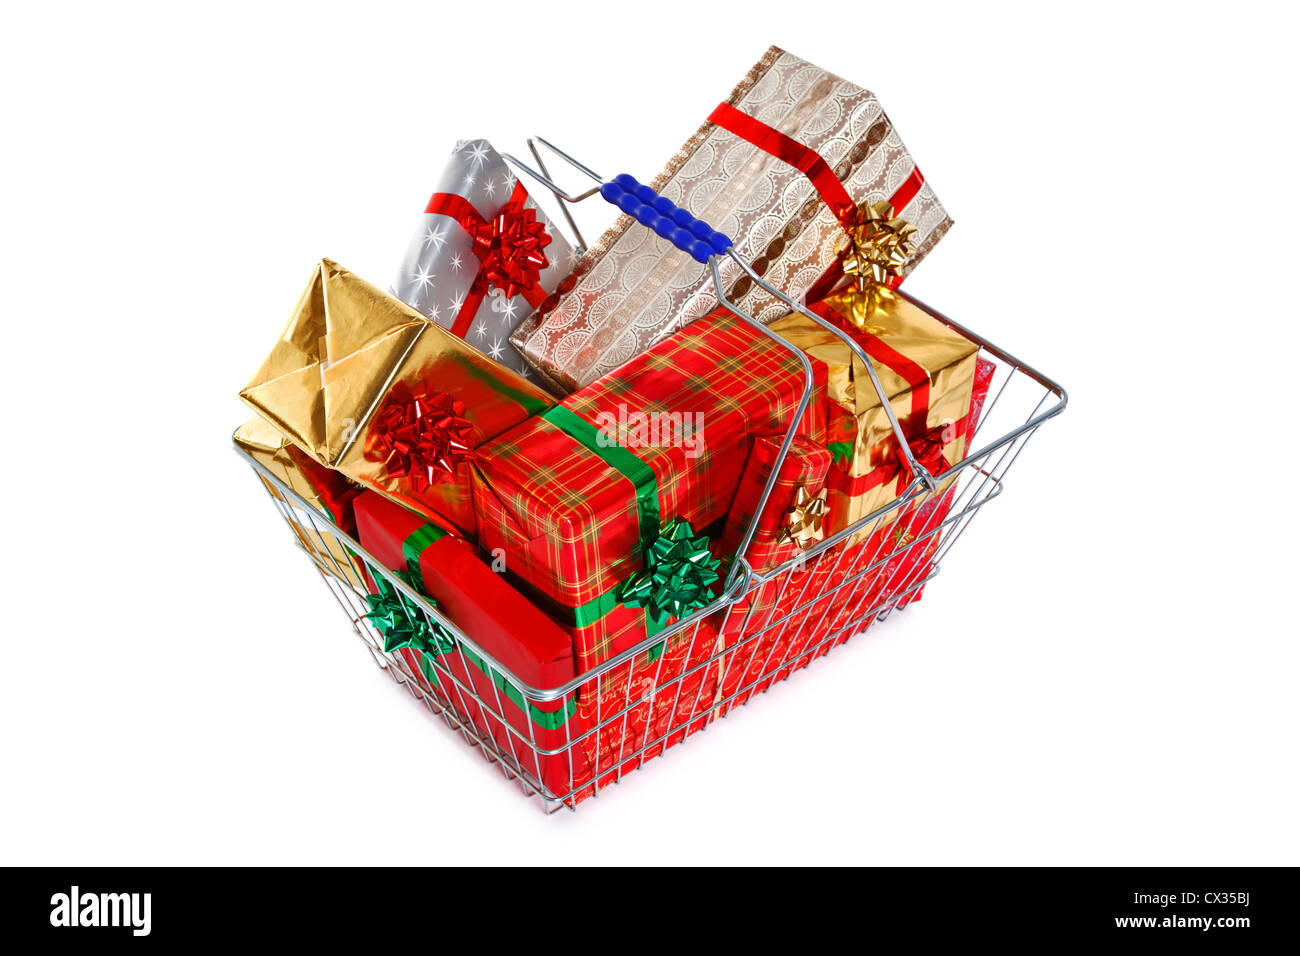 A wire shopping basket full of gift wrapped Christmas presents isolated on a white background. Stock Photo